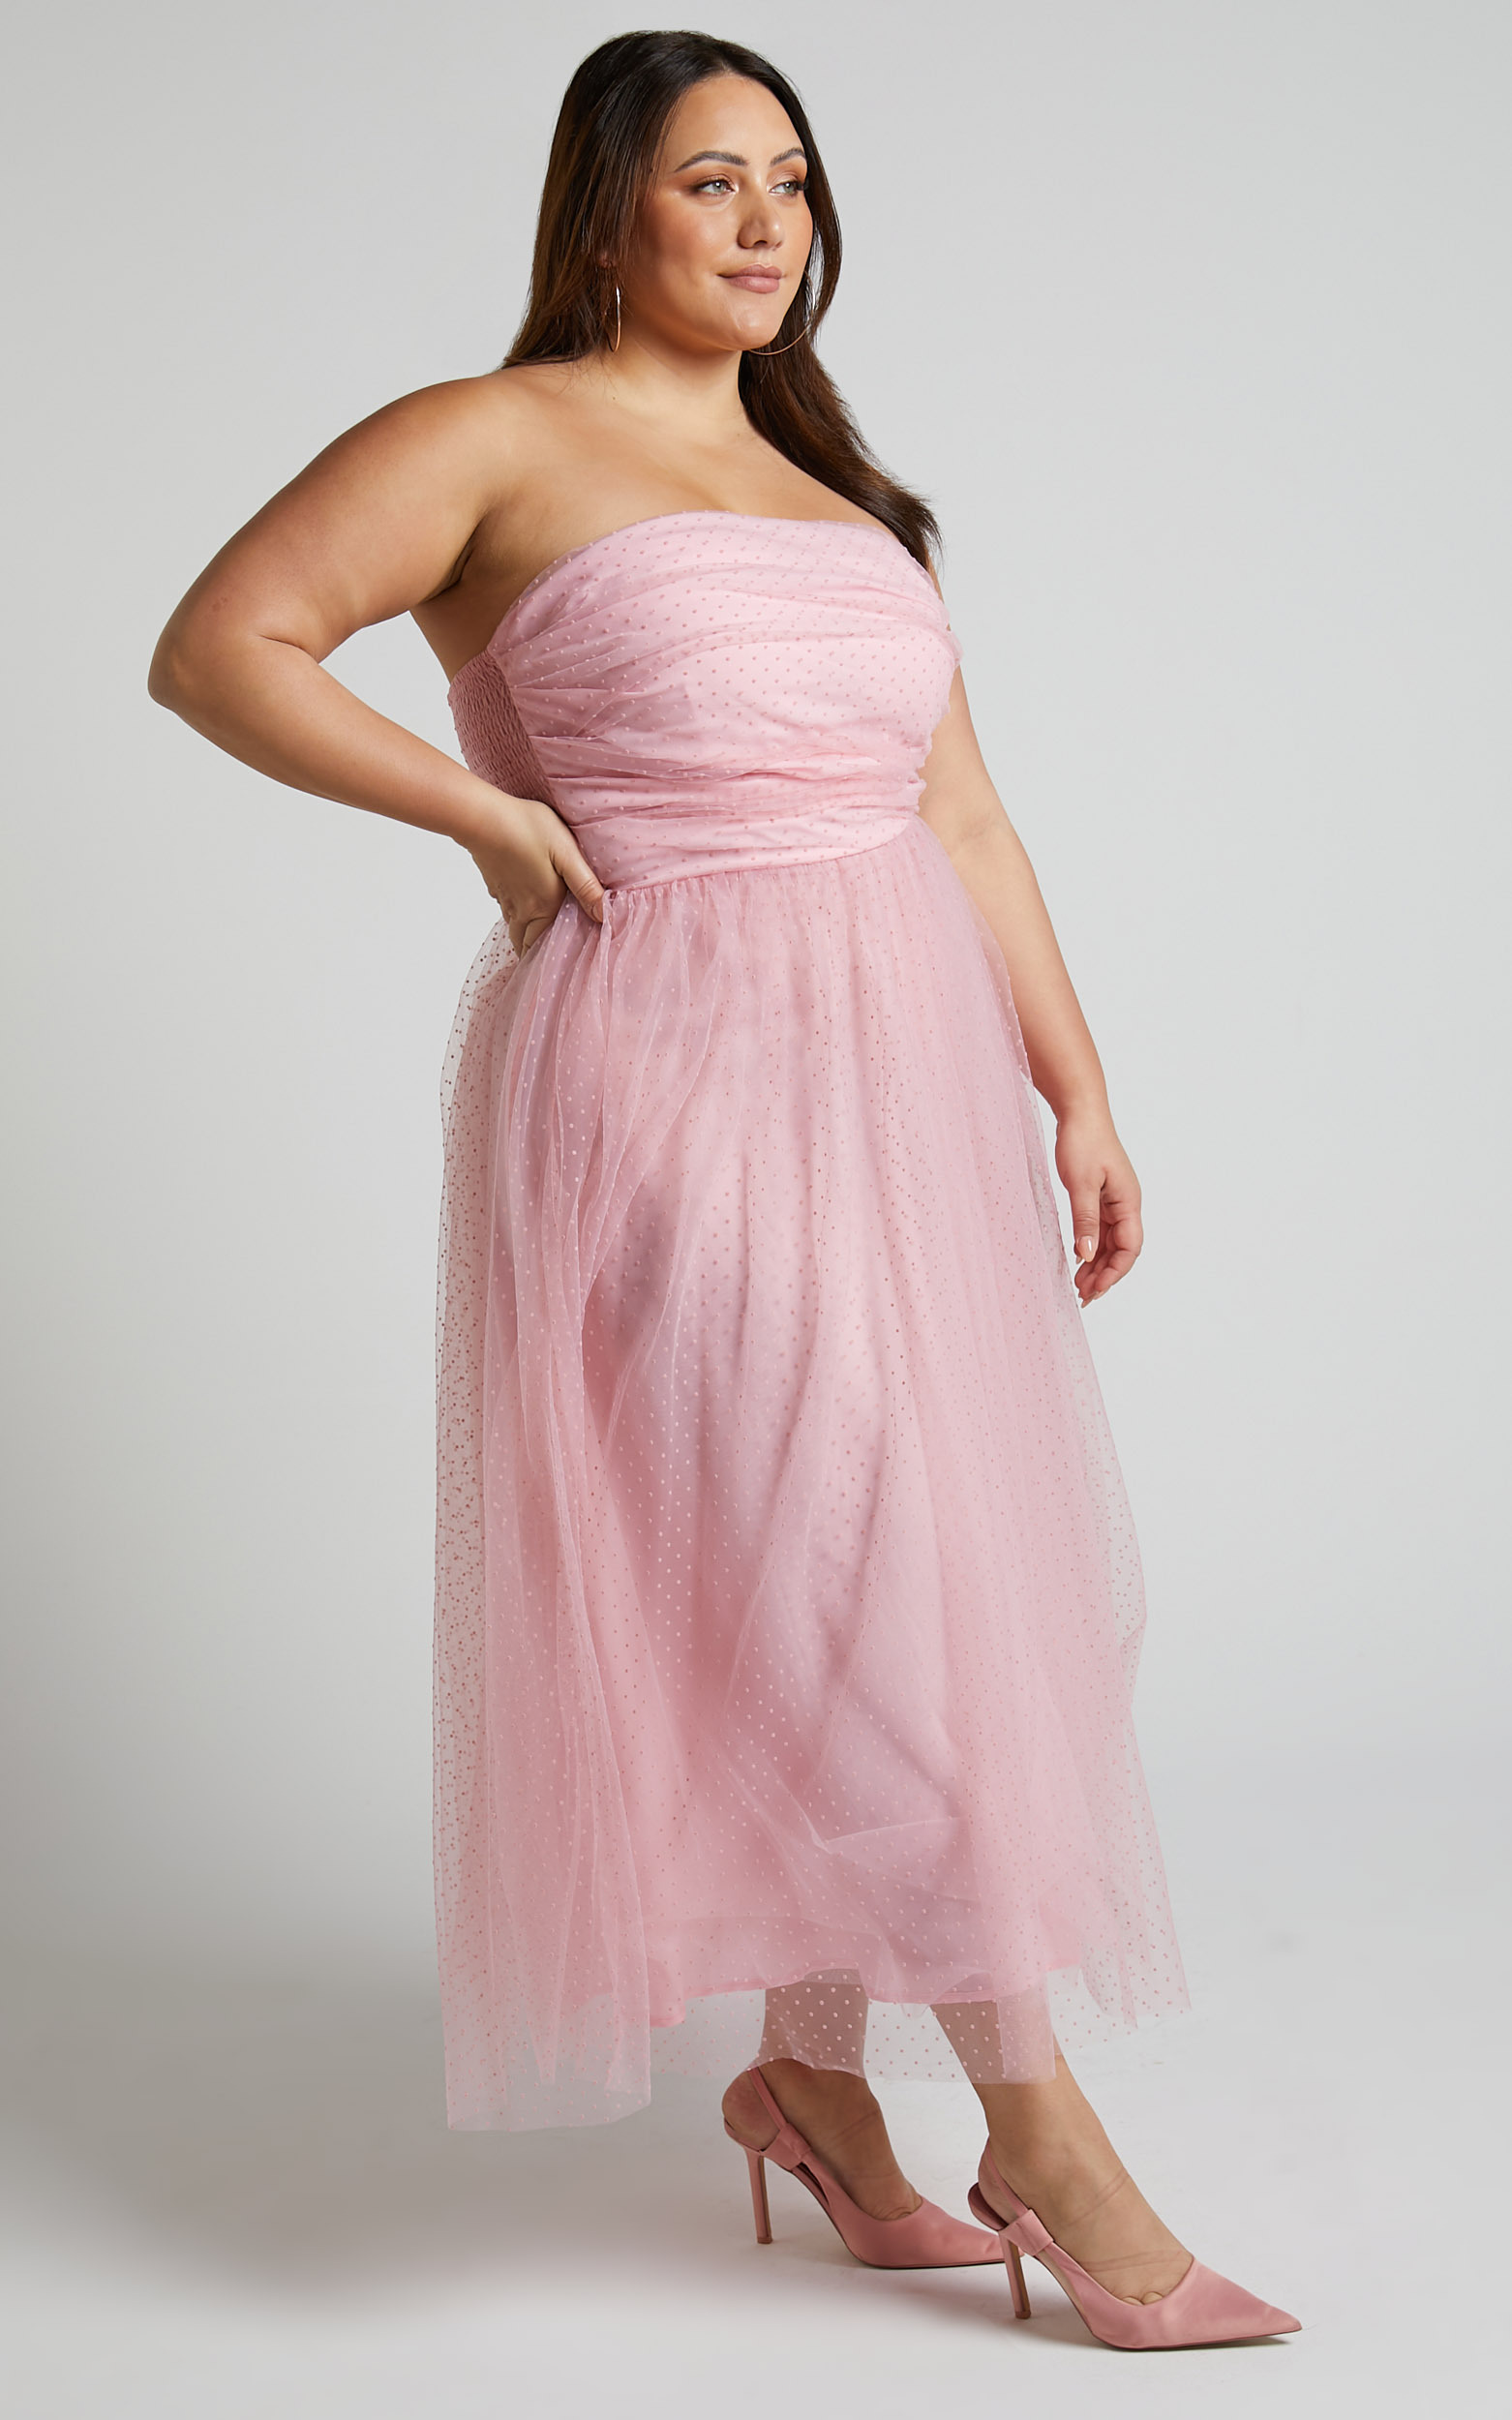 Jesslou Strapless Ruched Bodice Tulle Midi Dress in Pale Pink | Showpo USA